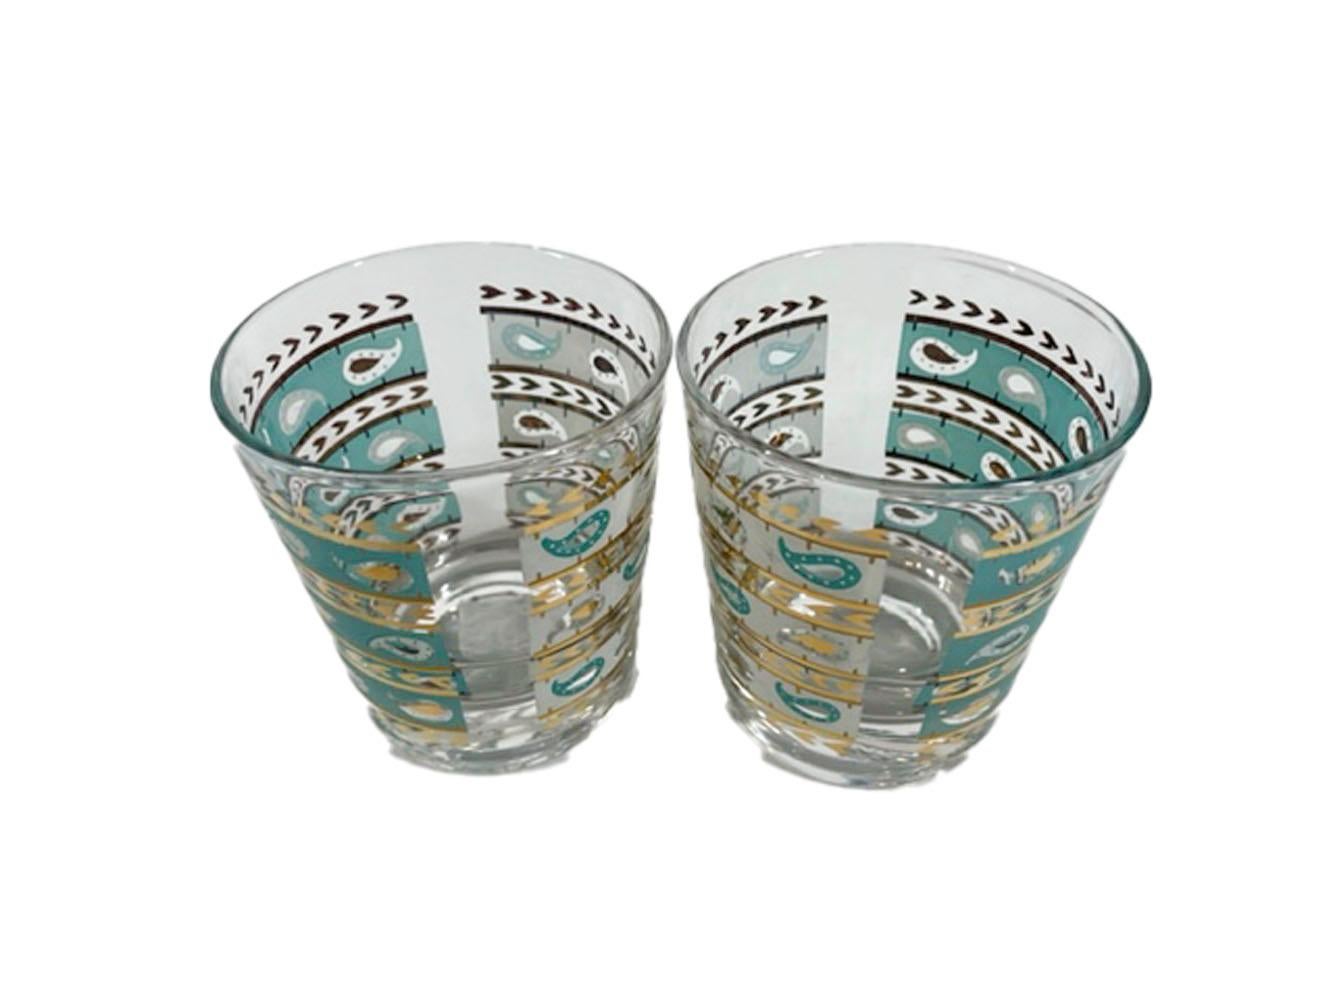 Four Mid-Century Modern old-fashioned glasses designed and decorated by Gay Fad. Each glass is decorated on one side in aqua and the other in white with alternating bands of gold as well as the colored bands having paisley elements in the other